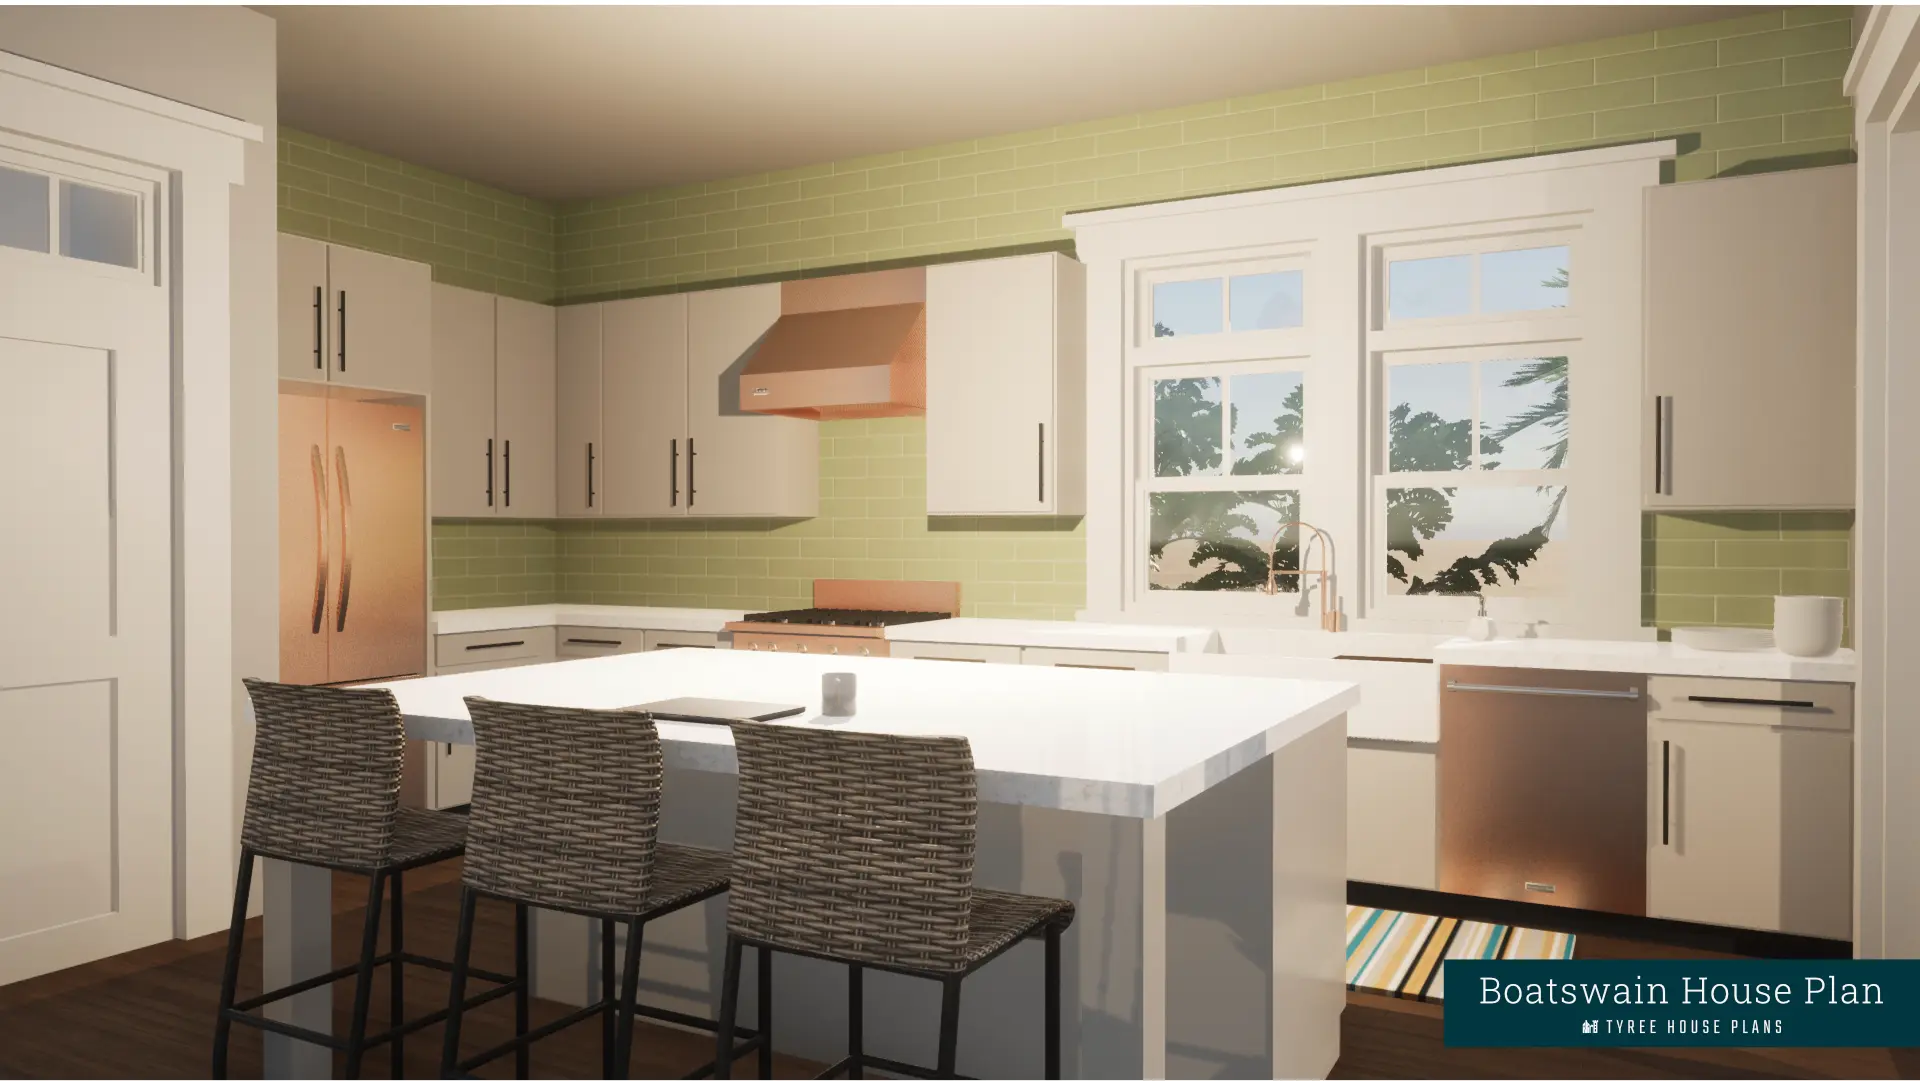 Windows above the kitchen sink. Boatswain by Tyree House Plans